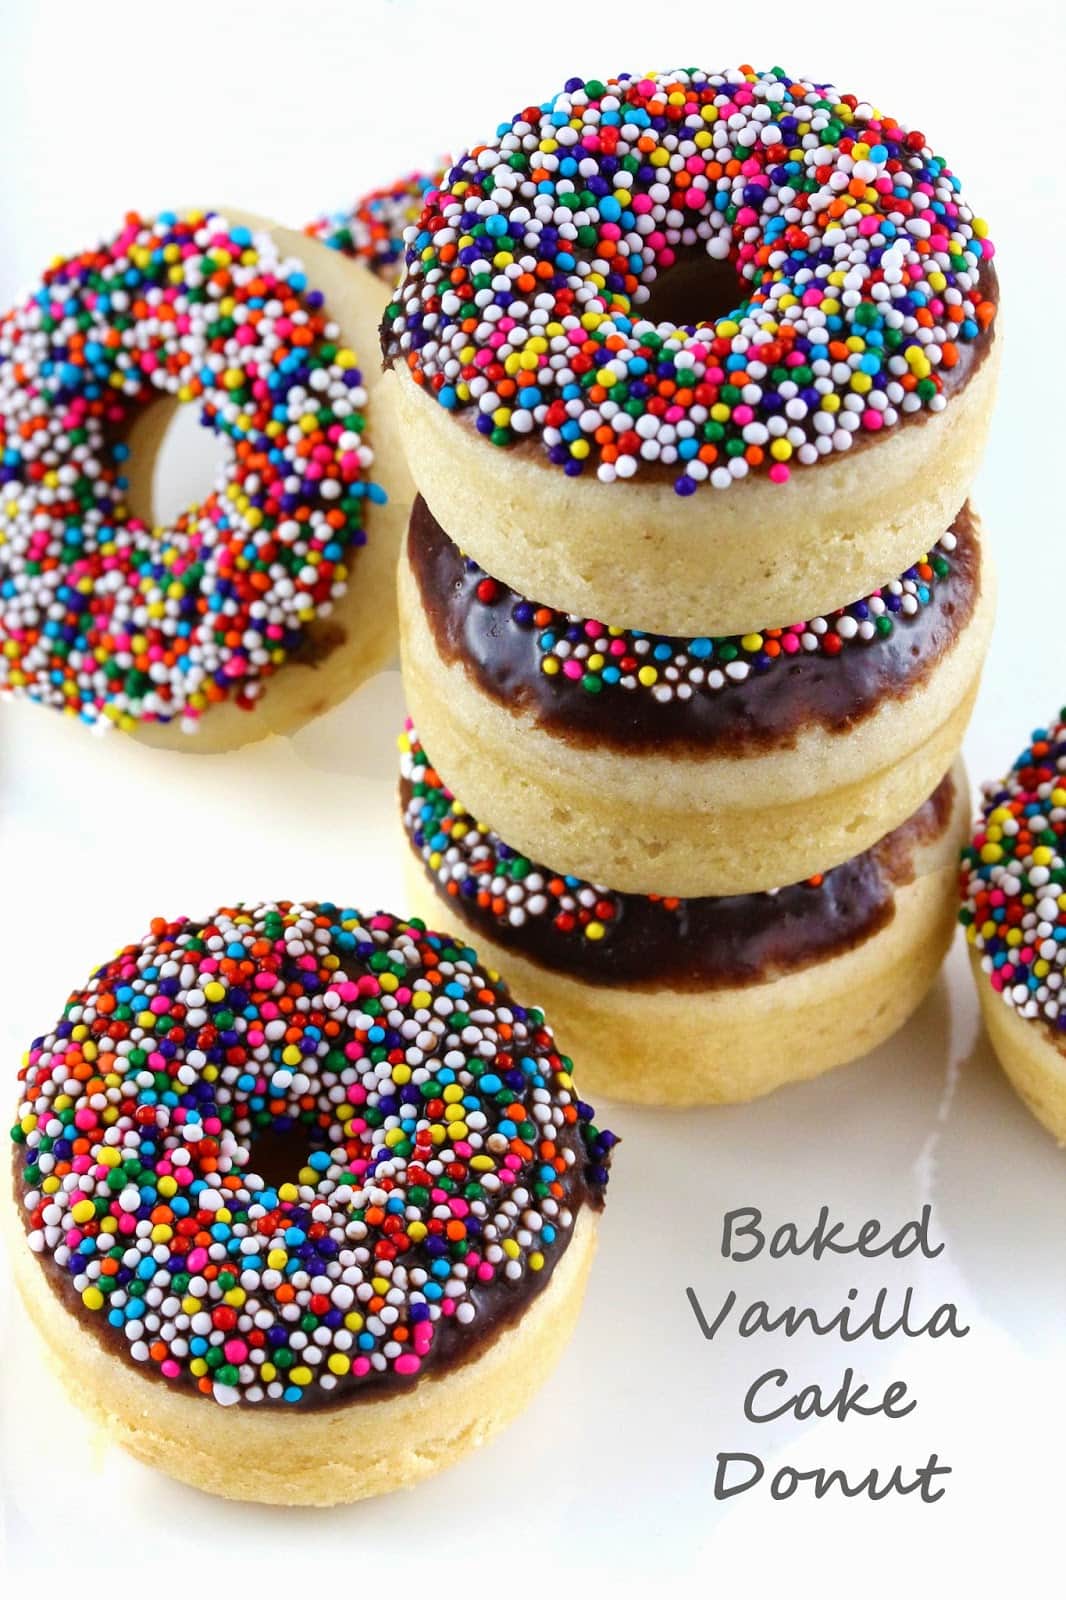 Baked vanilla cake donuts topped with a semi-sweet chocolate glaze and sprinkles. You can't go wrong with sprinkles!